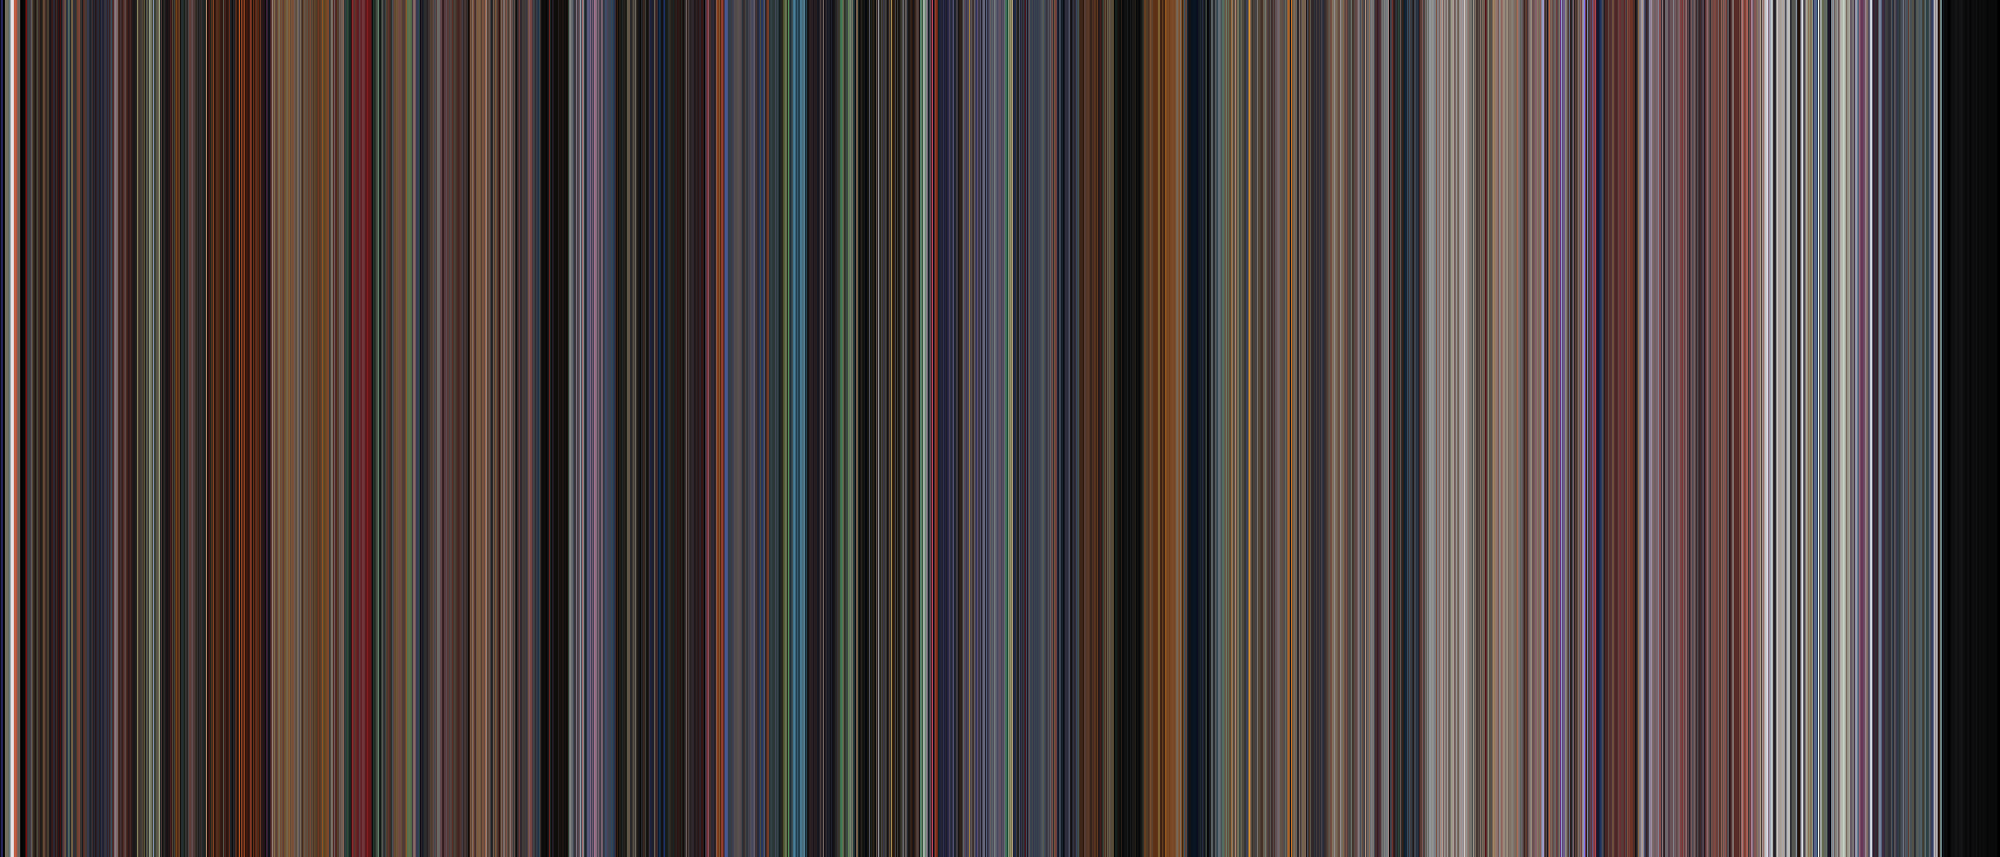 Akira barcode, generated with smoothing set to color bands only at 7467 x 3200 and scaled down to 2000.